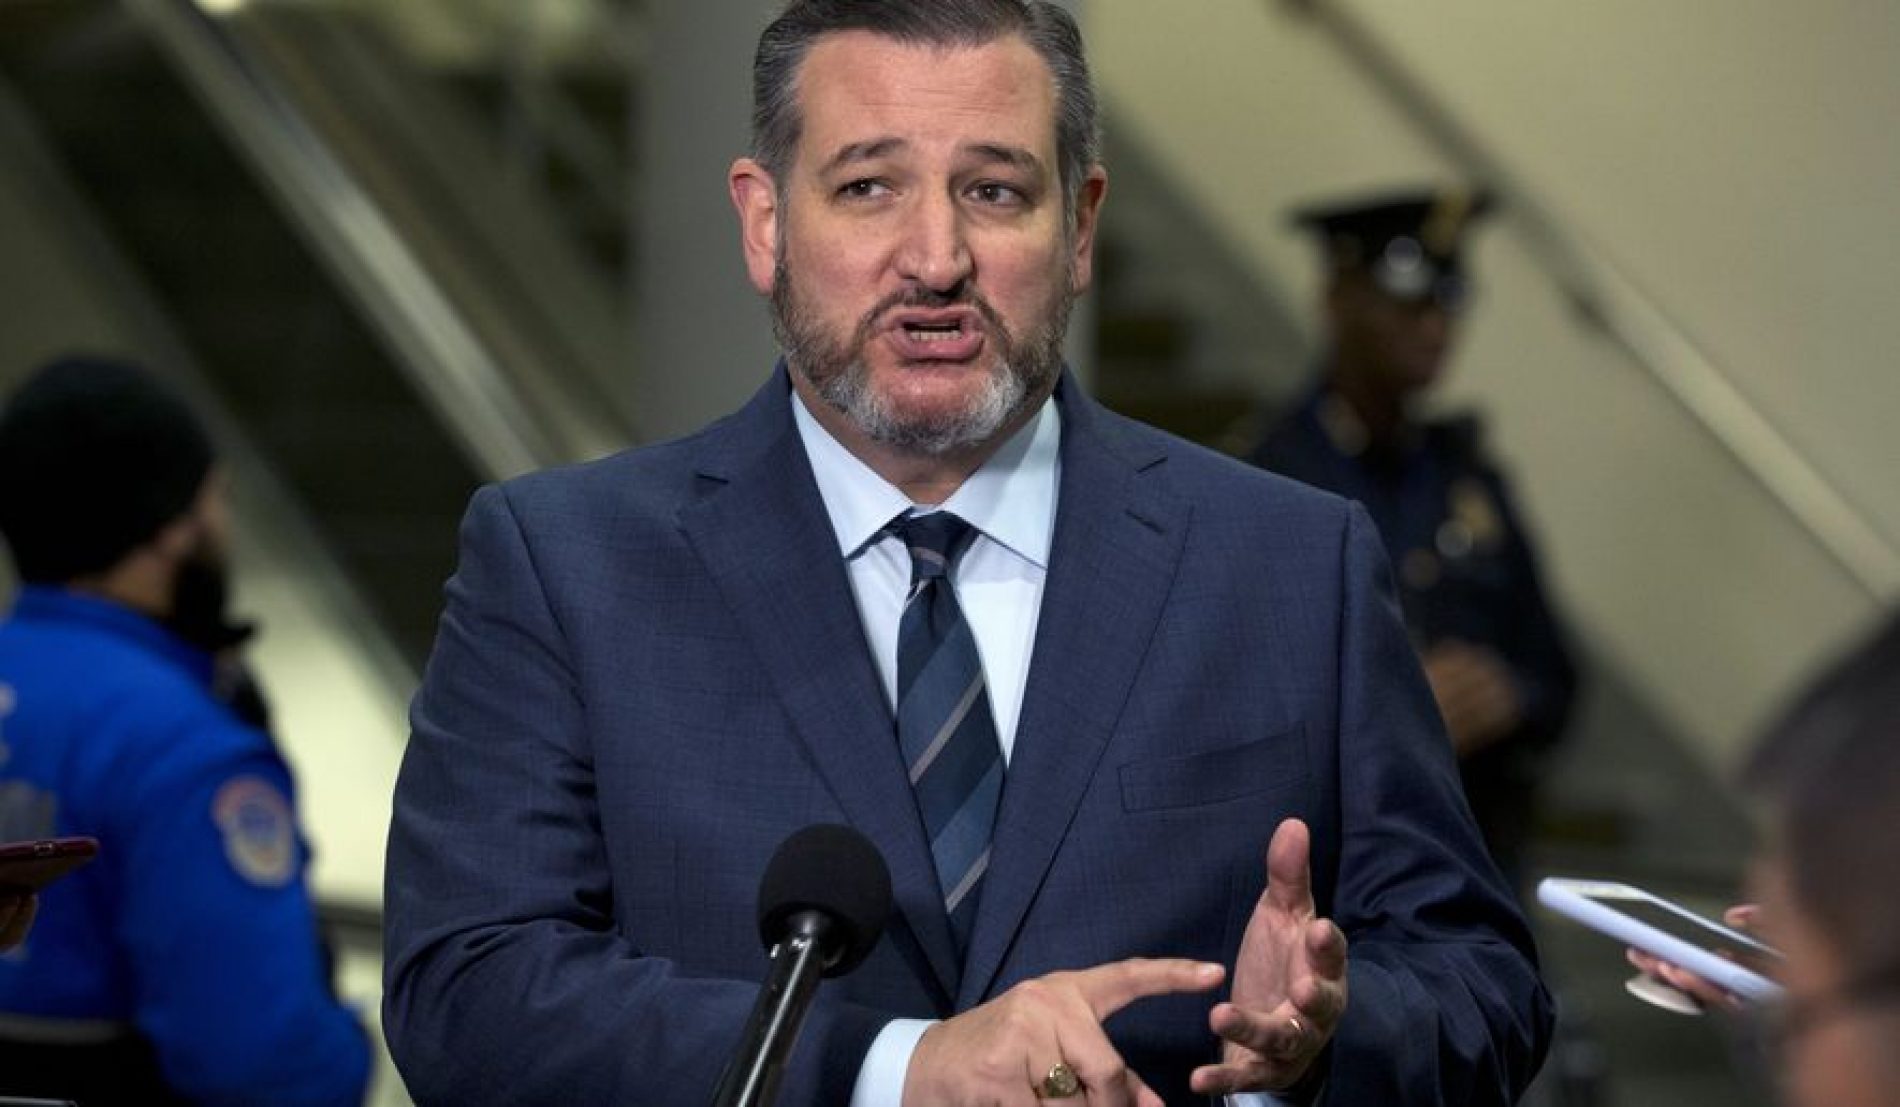 Ted Cruz criticizes vasectomy bill on Twitter, exposing his hypocrisy on reproduction rights